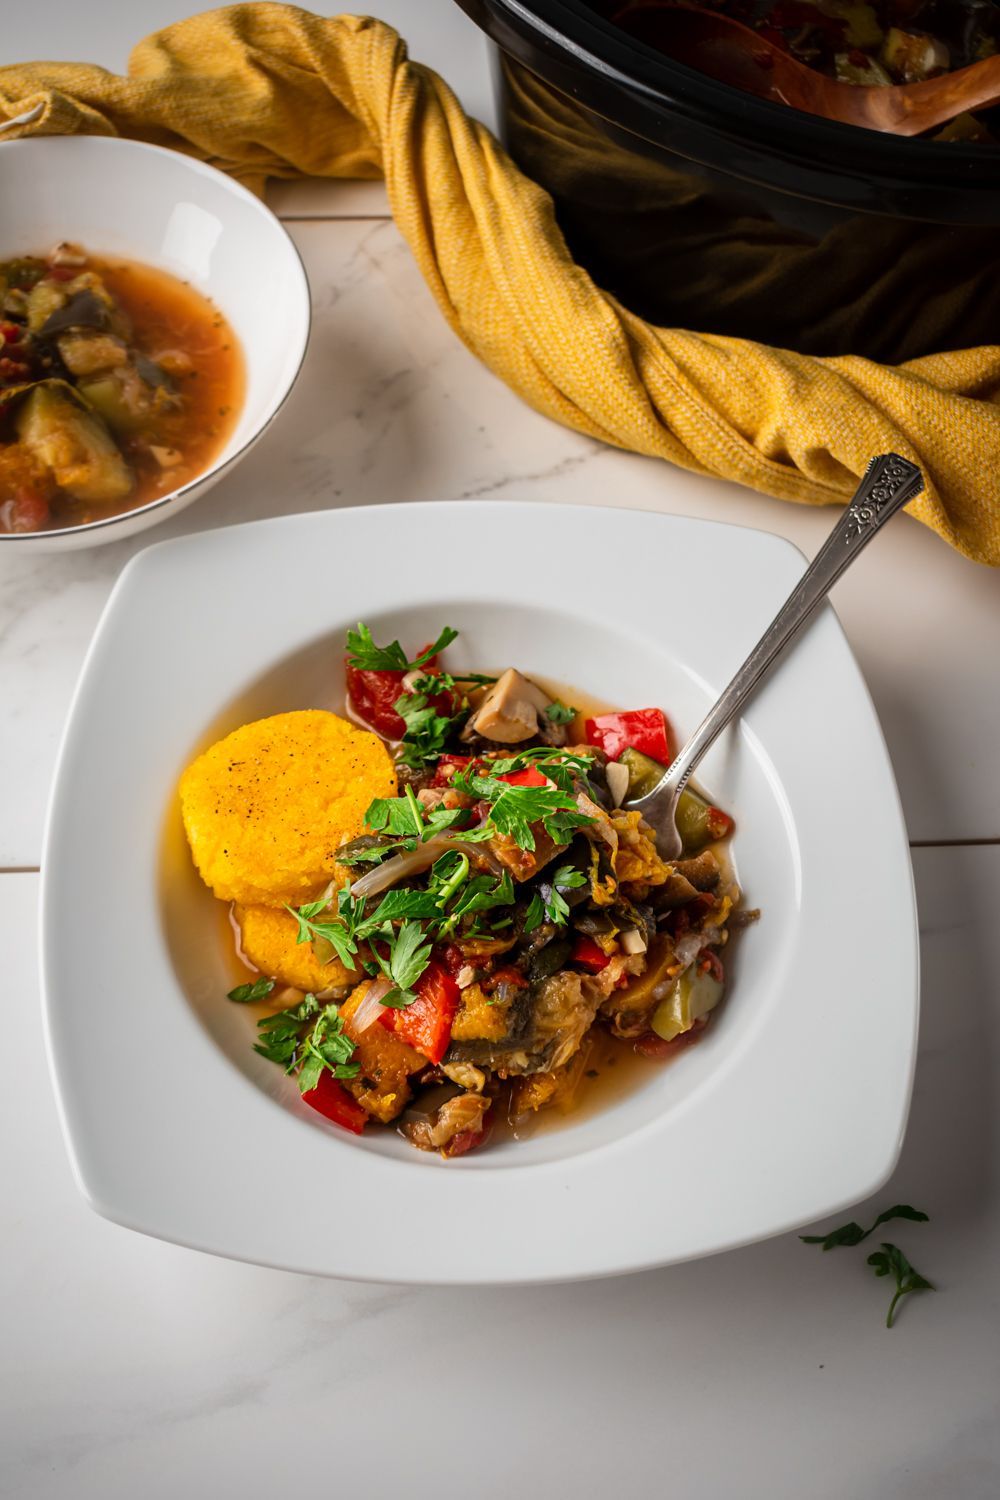 French ratatouille stew in a bowl with eggplant, zucchini, summer squash, and tomatoes topped with fresh herbs and served with crispy polenta